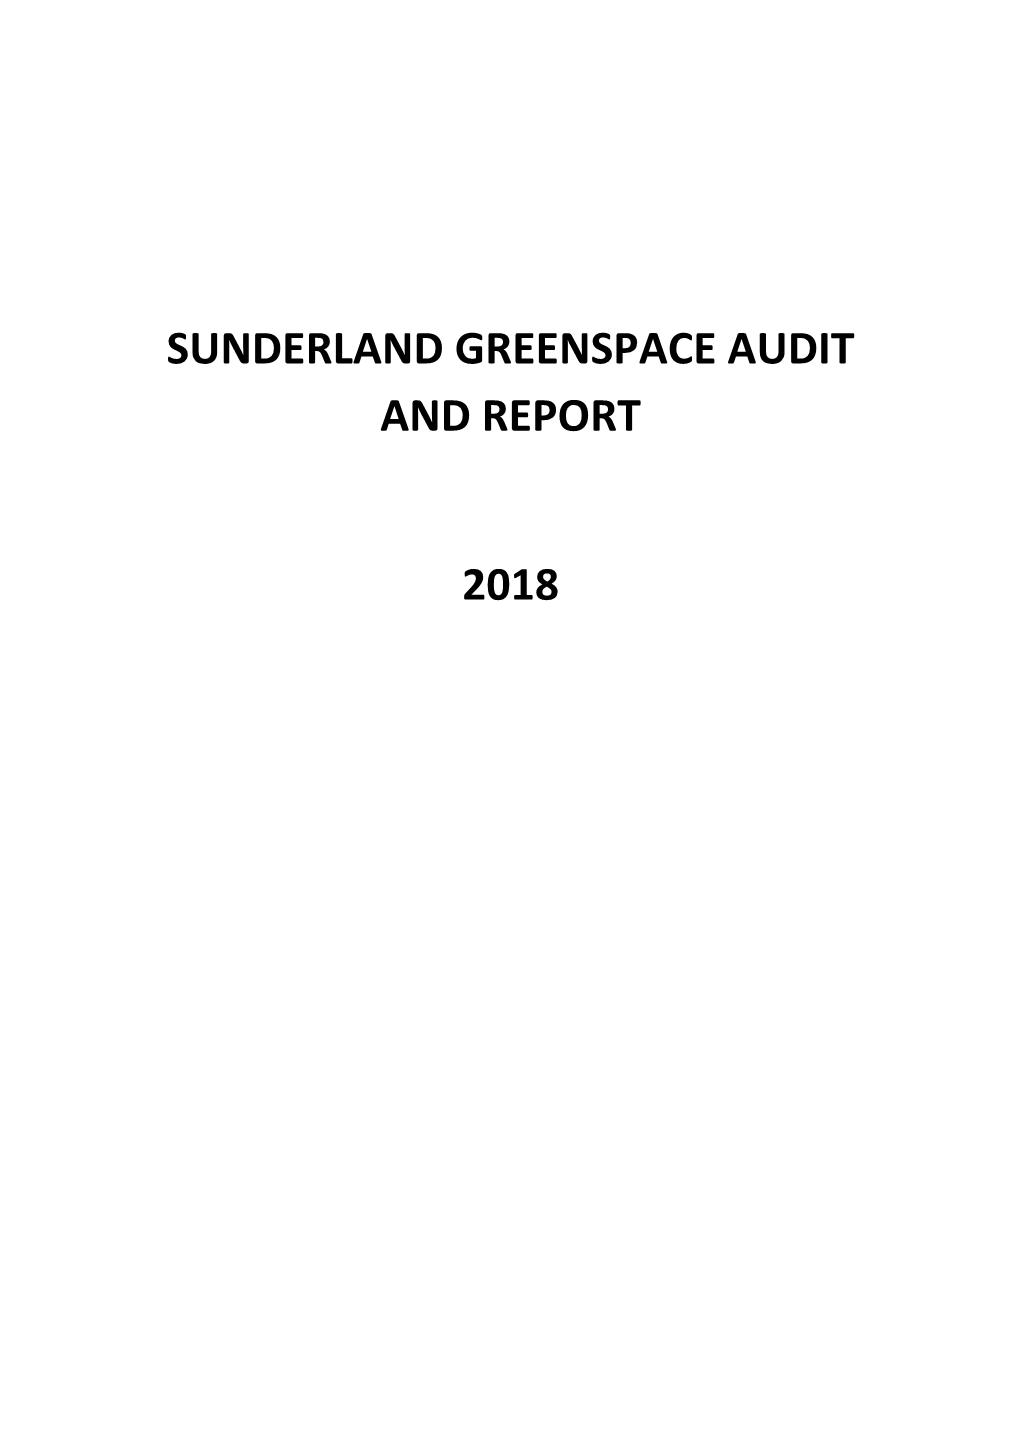 Sunderland Greenspace Audit and Report 2018